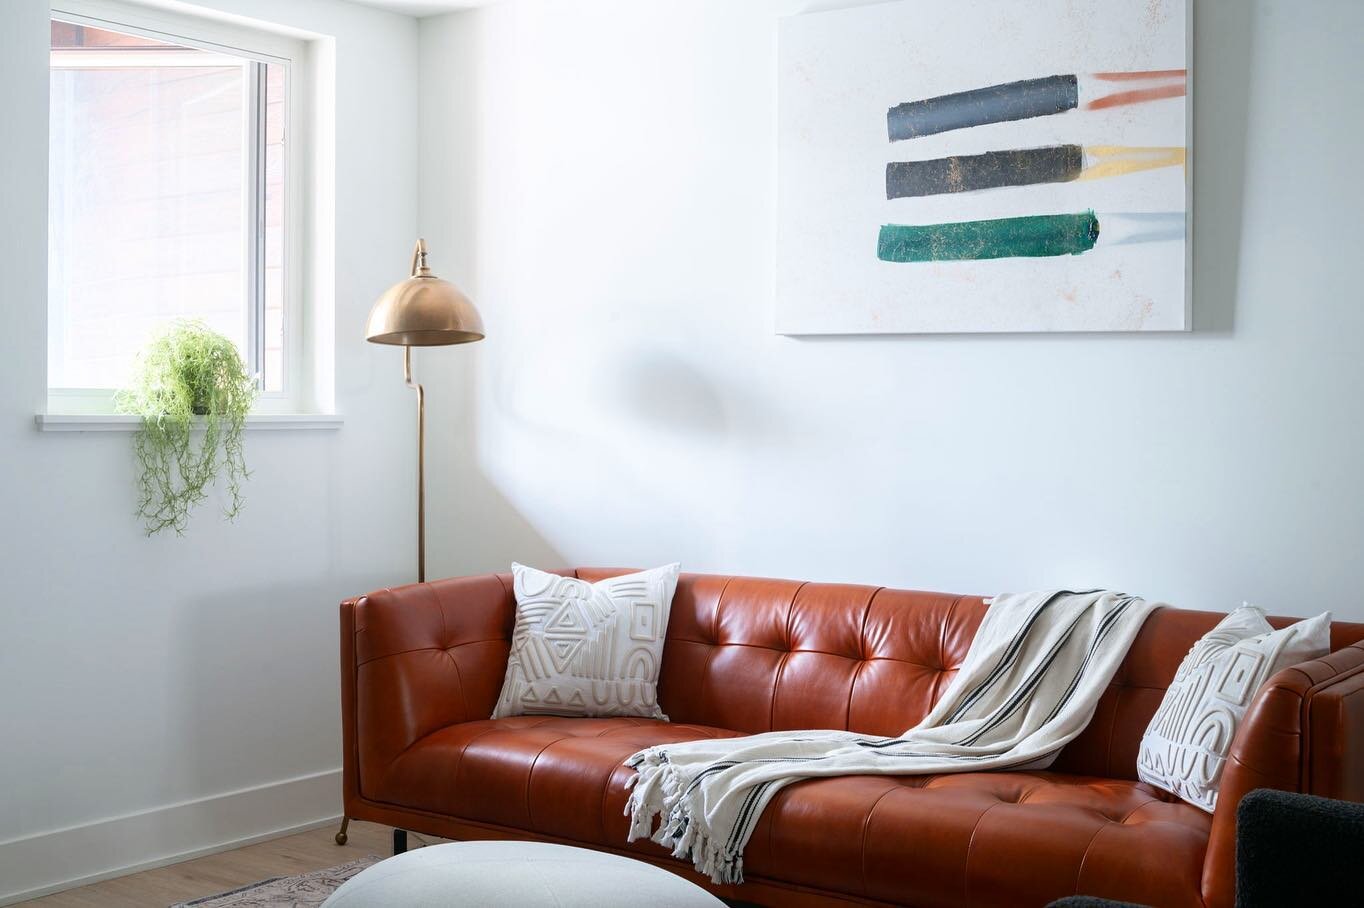 Home Staging by @noiretblanc.co 

&ldquo;The first impression occurs at a subconscious level before your brain has time to evaluate the space at a cognitive level. It is felt, not thought.&rdquo; - Kristie Barnett 

#homestaging #homedecor #interiord